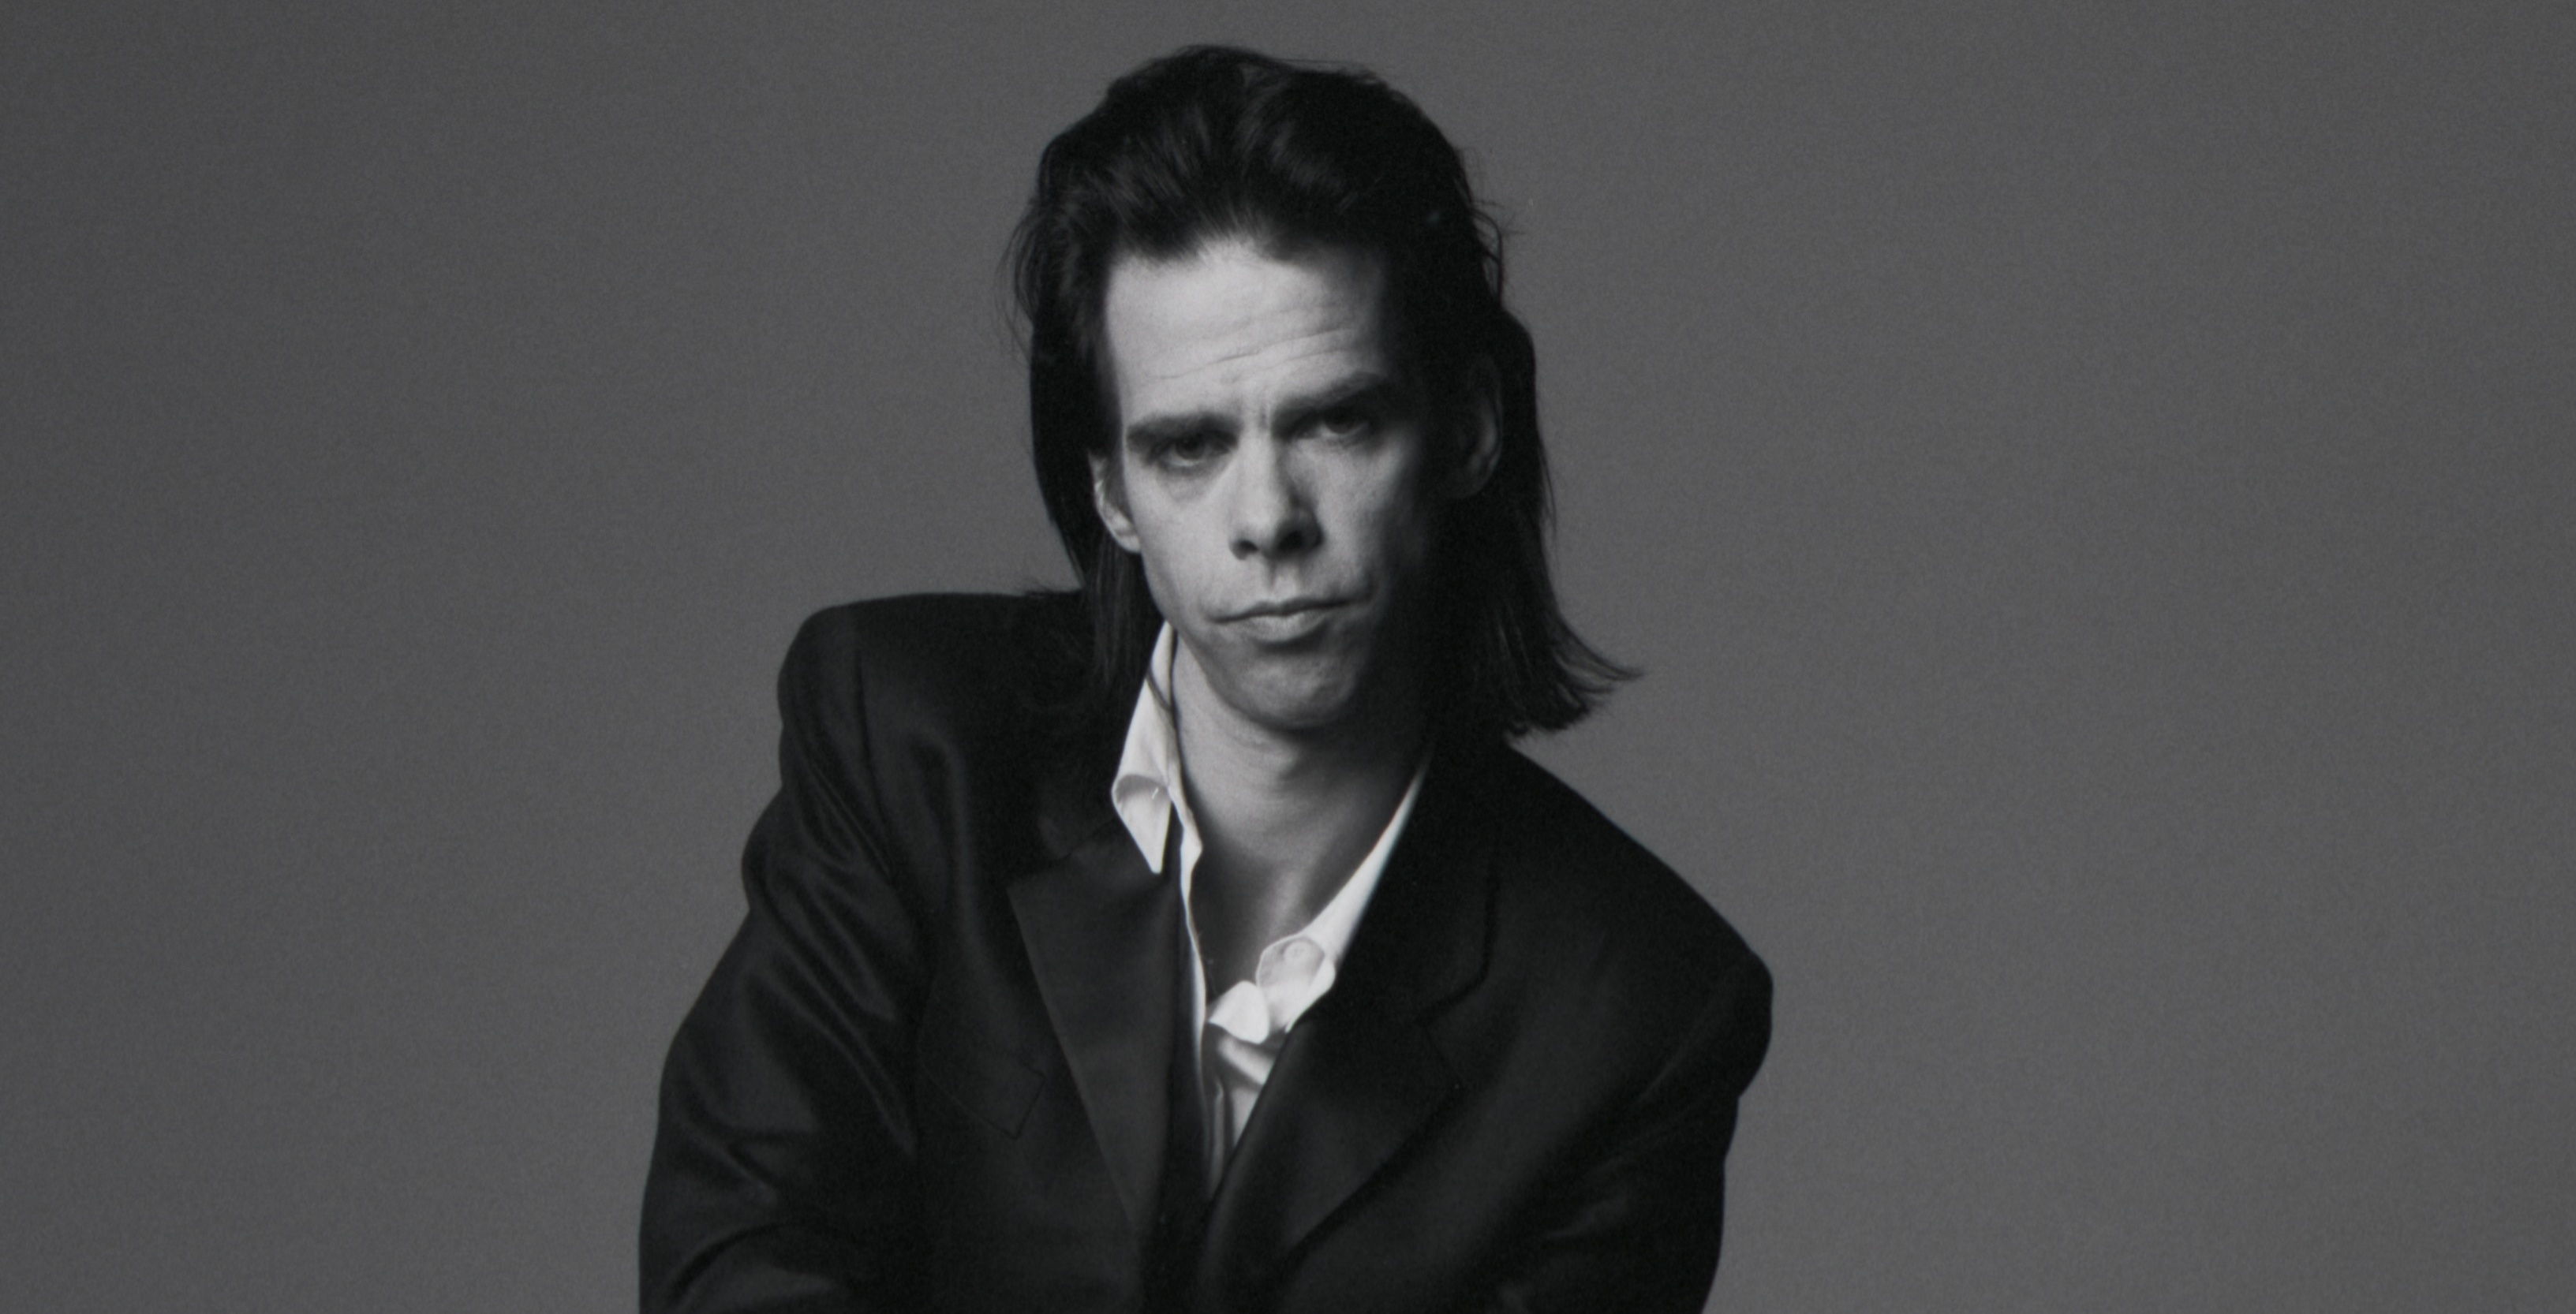 Nick Cave Offers Advice on 'Making It' in Music